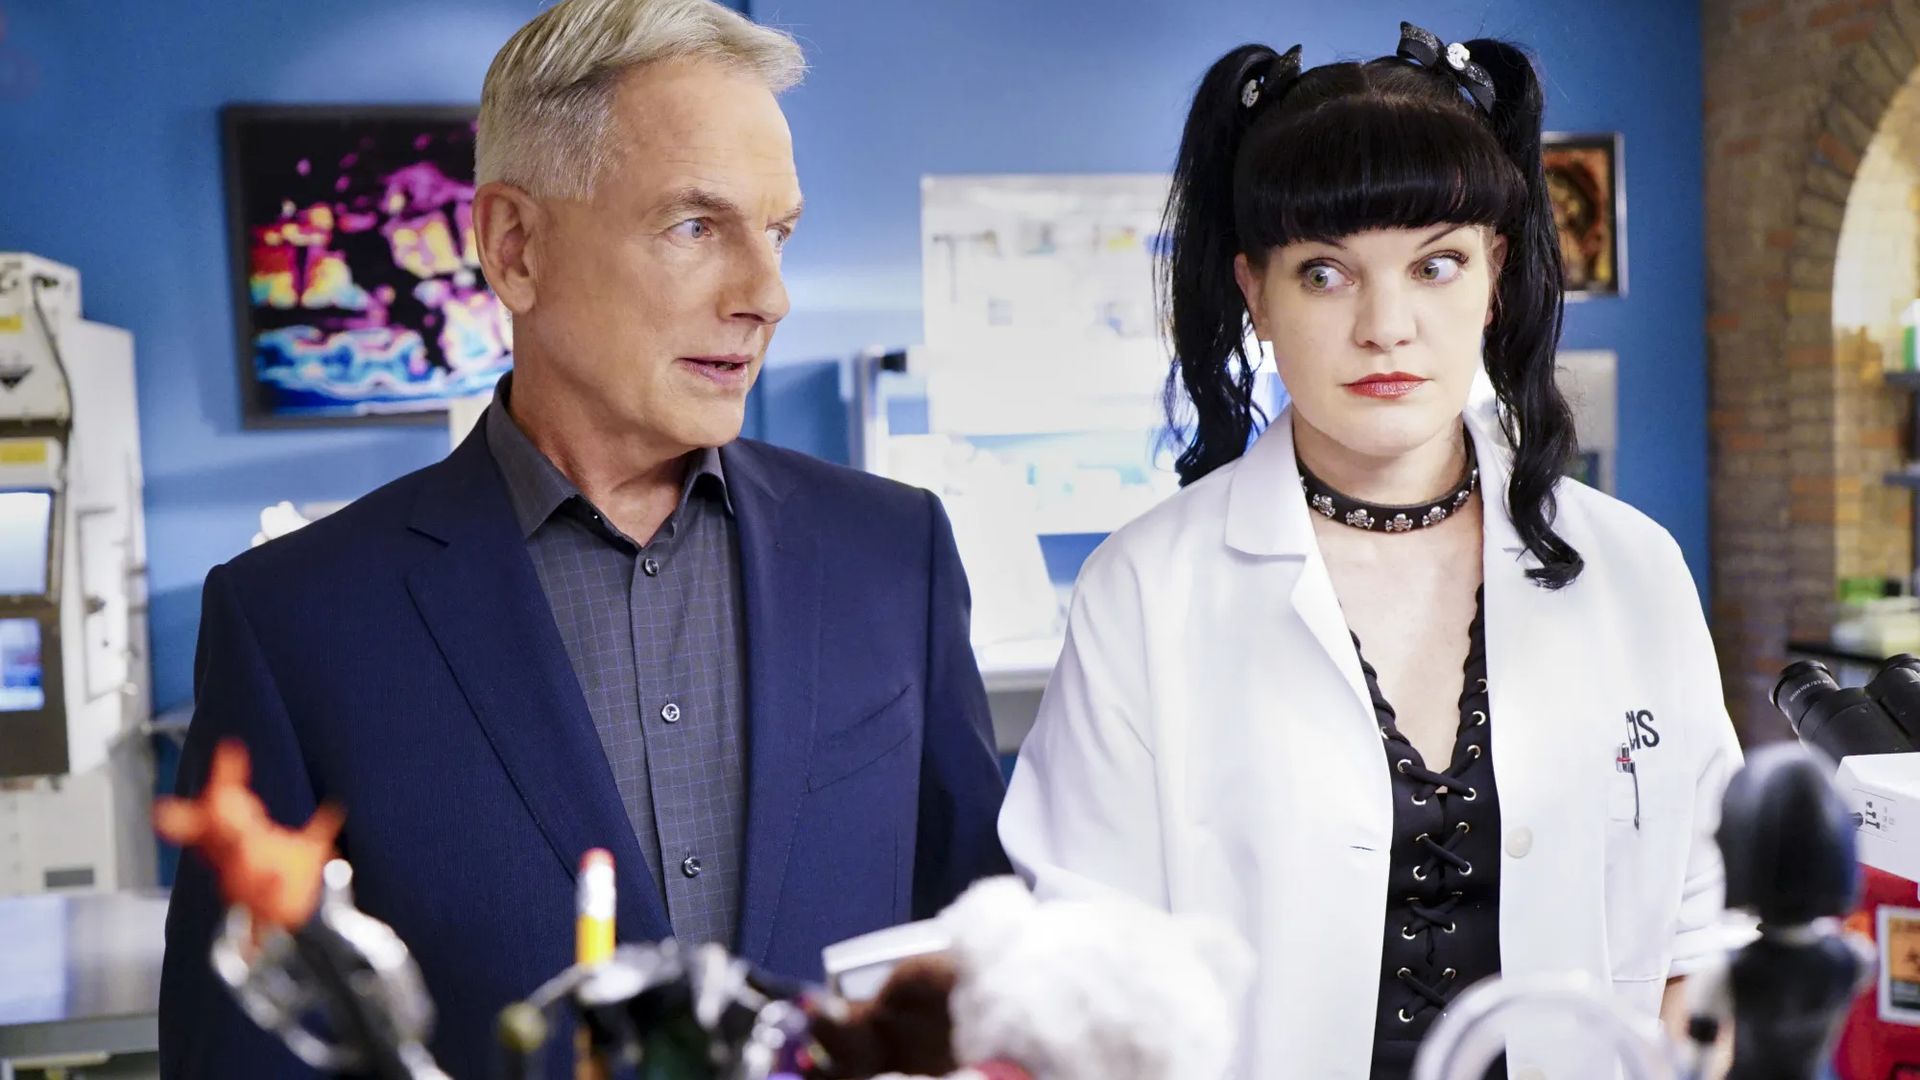 Mark Harmon and Pauley Perrette as Gibbs and Abby on NCIS